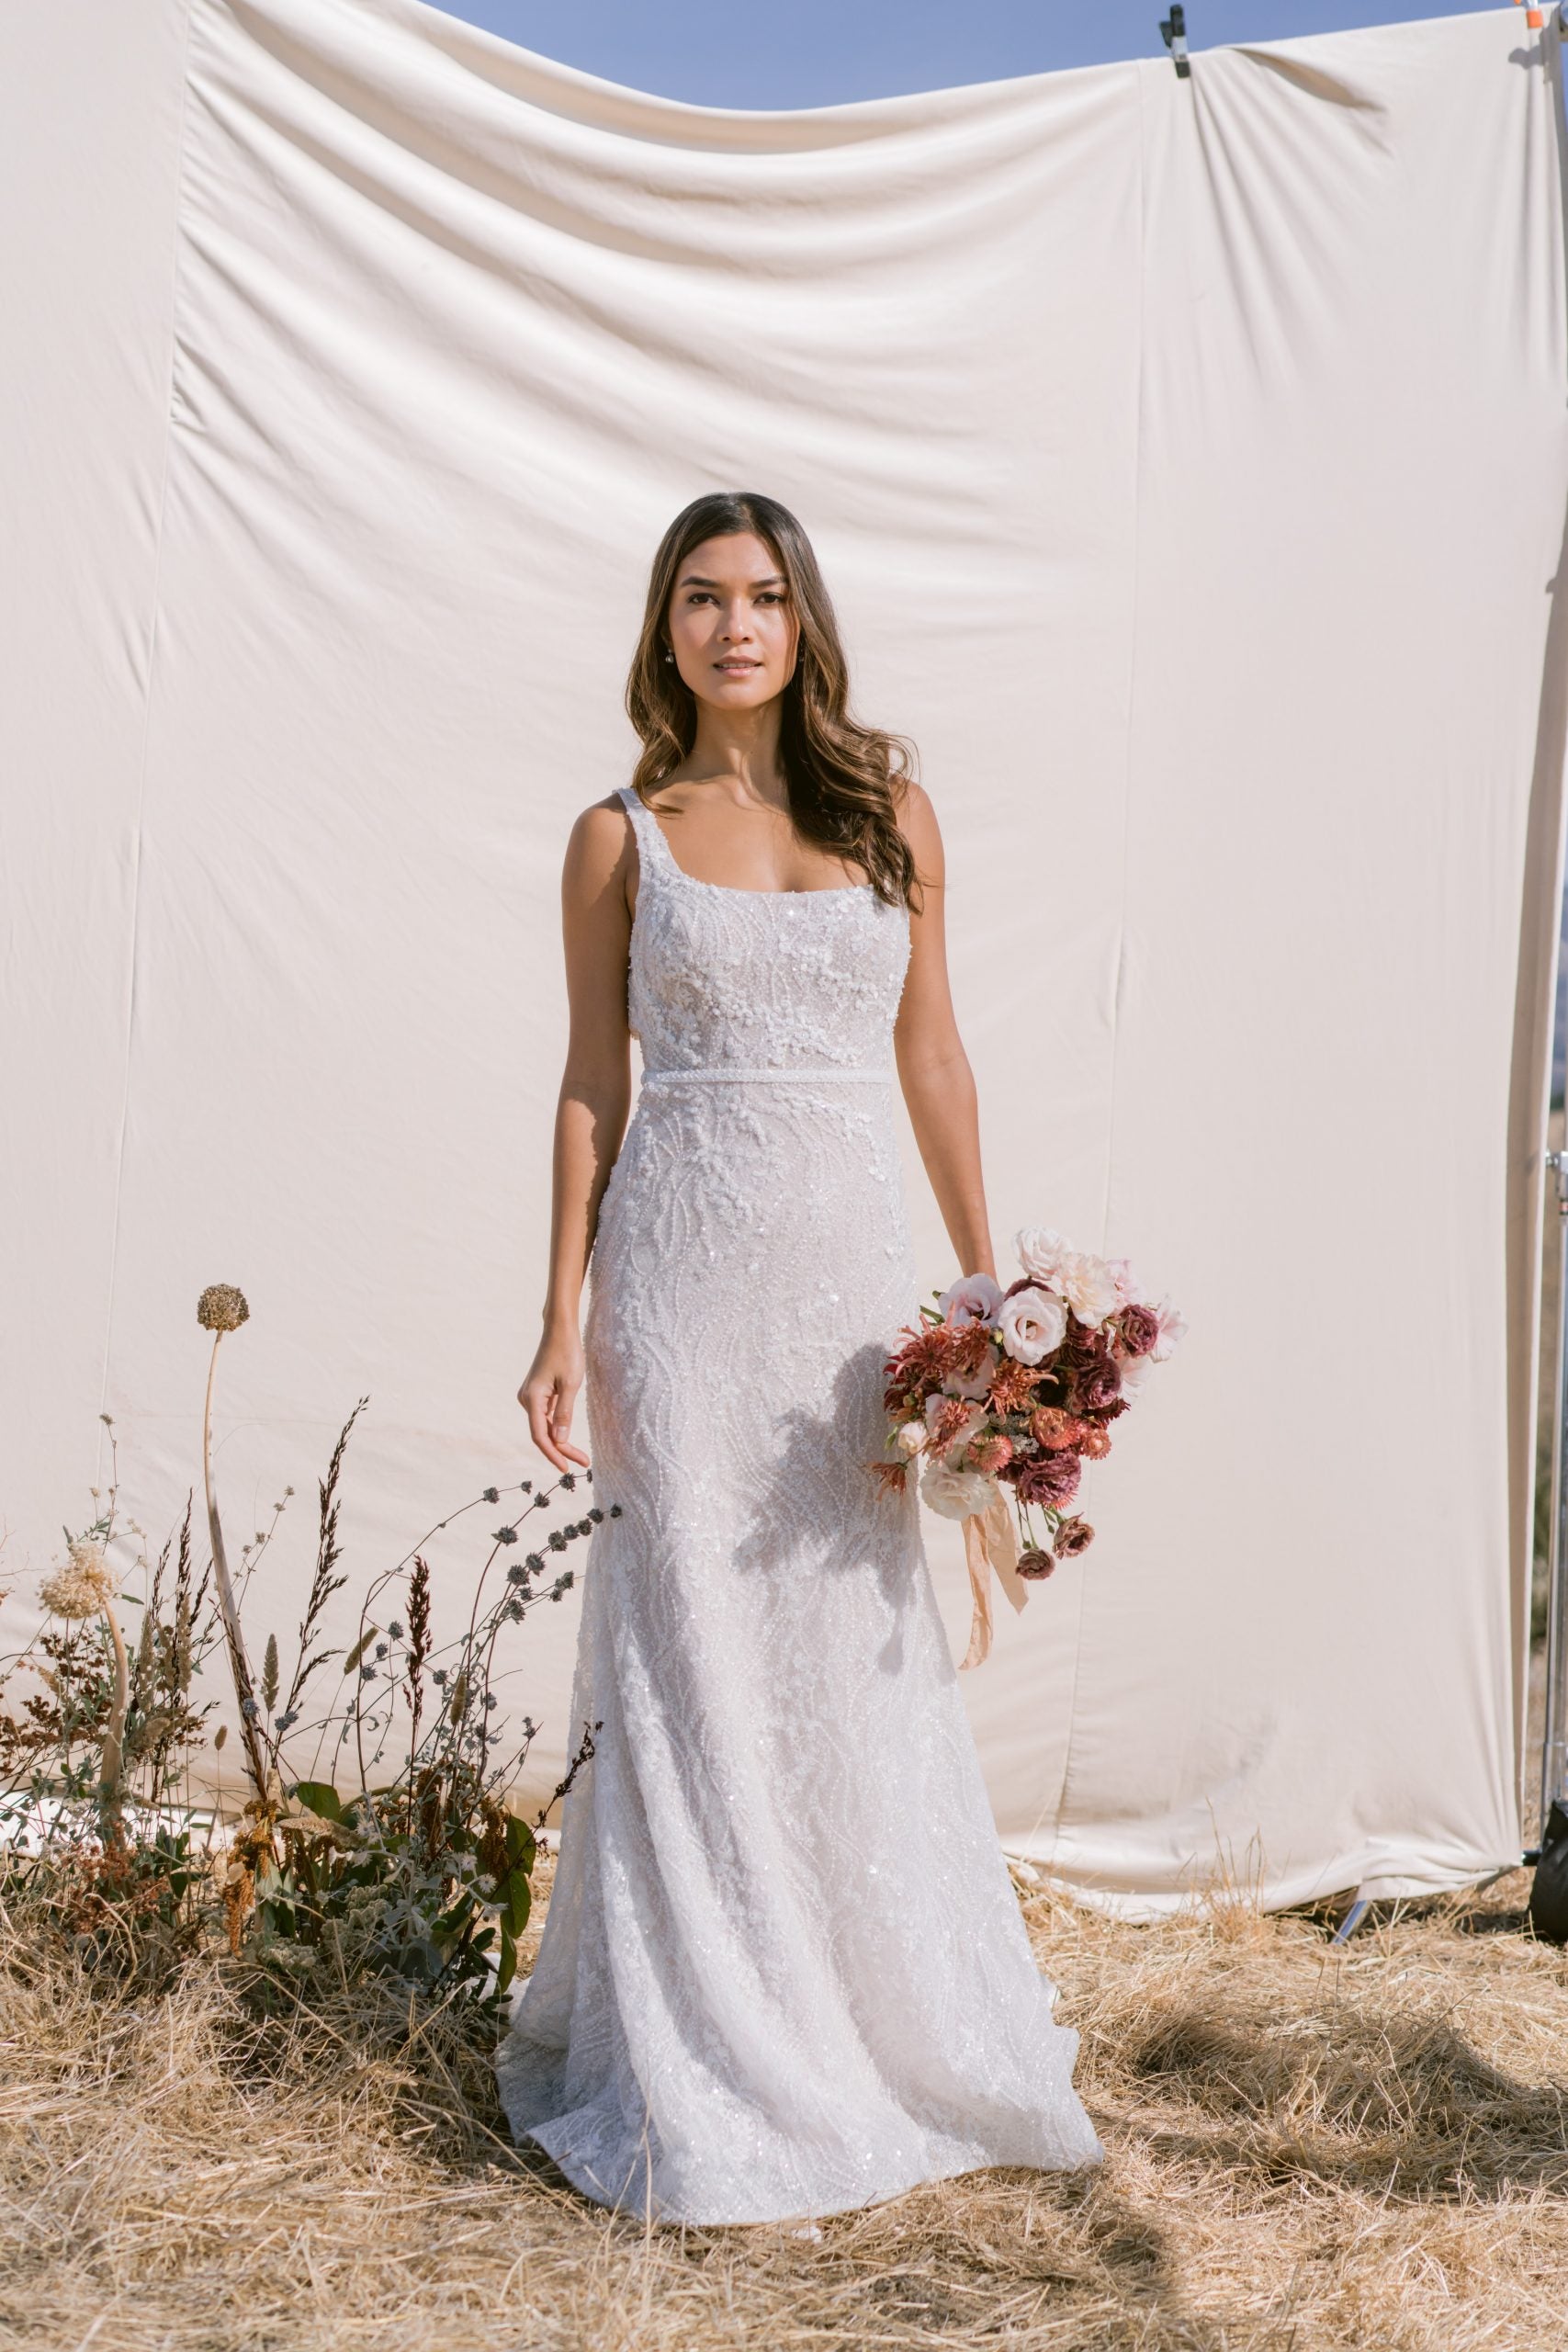 How to Find the Best Wedding Dress for Your Body Shape